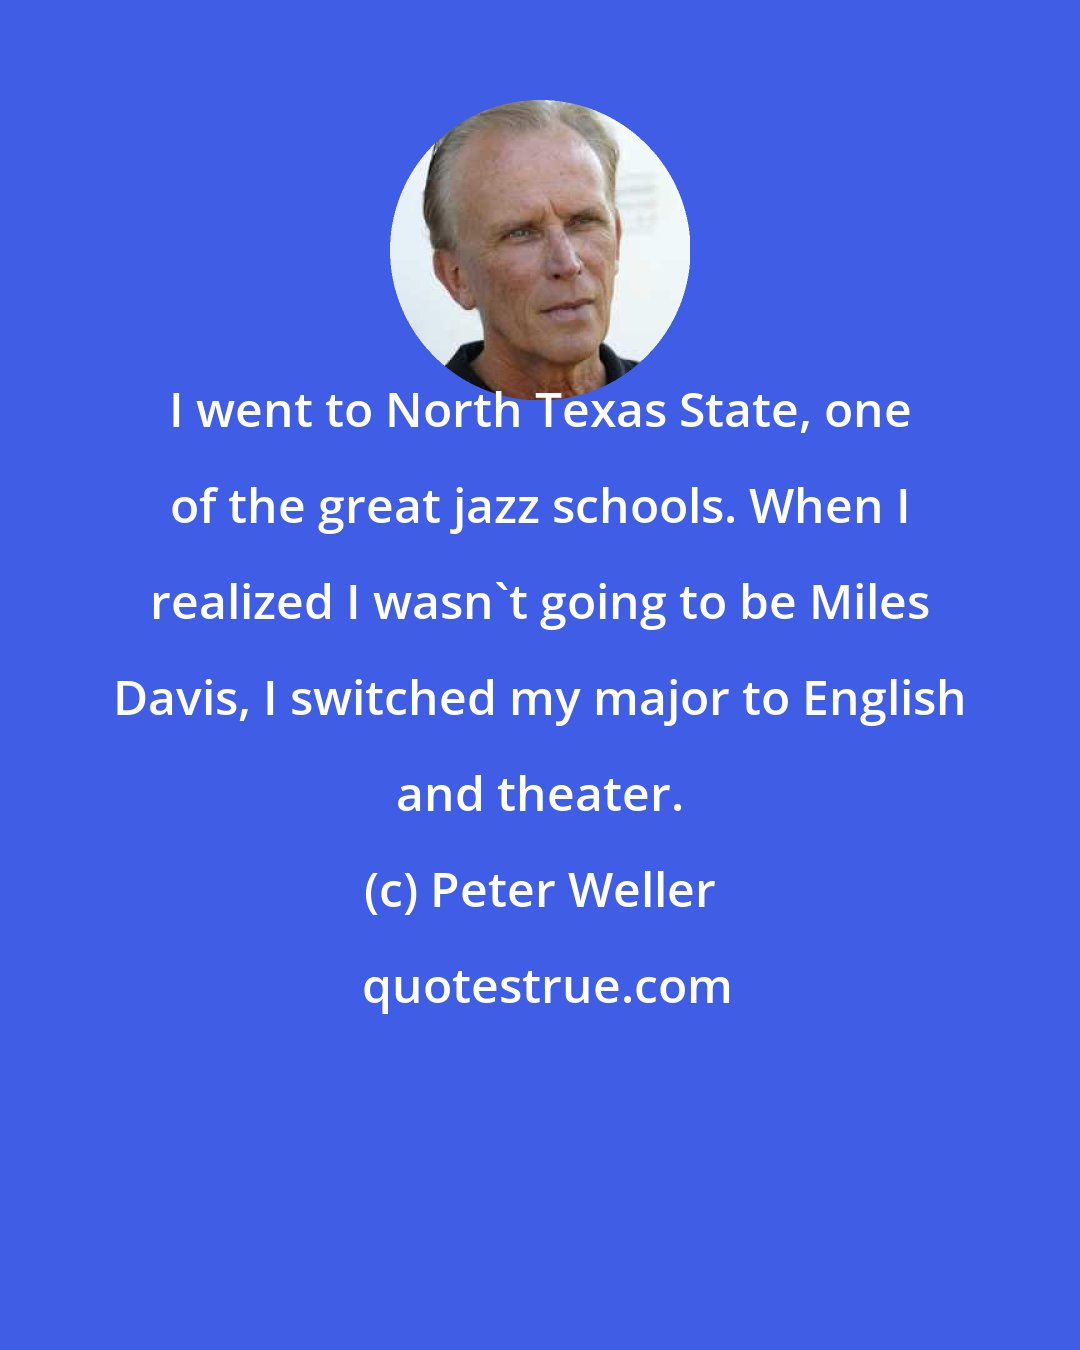 Peter Weller: I went to North Texas State, one of the great jazz schools. When I realized I wasn't going to be Miles Davis, I switched my major to English and theater.